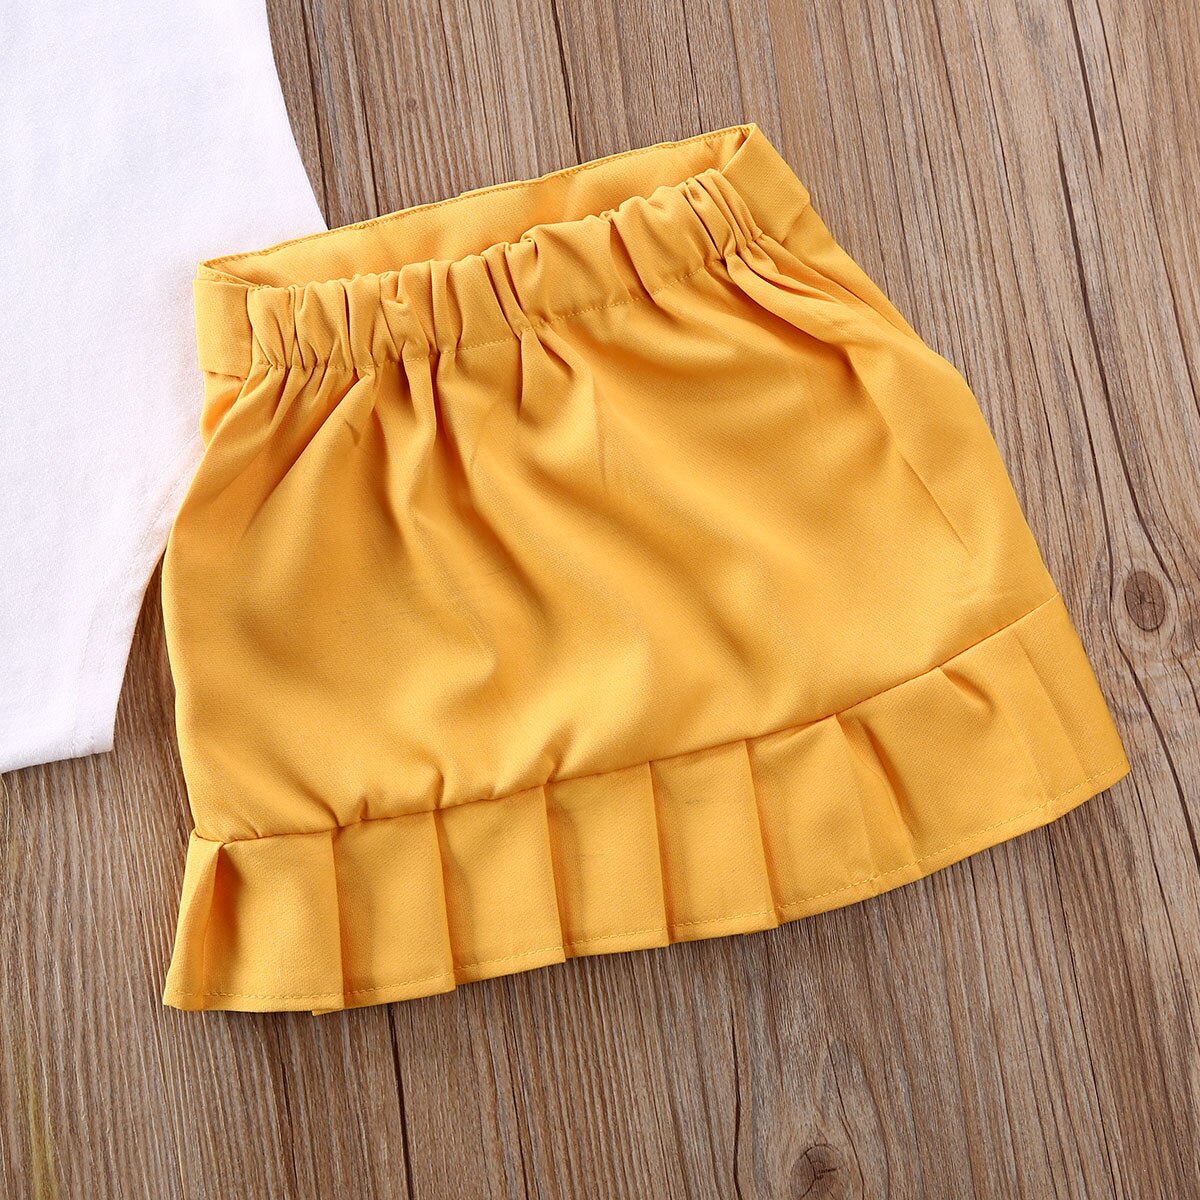 0-5Y-Fashion-Toddler-Kids-Baby-Girls-Clothes-Sets-Solid-Sleeveless-Bodysuit-Tops-Yellow-Pleated-Skirts-4